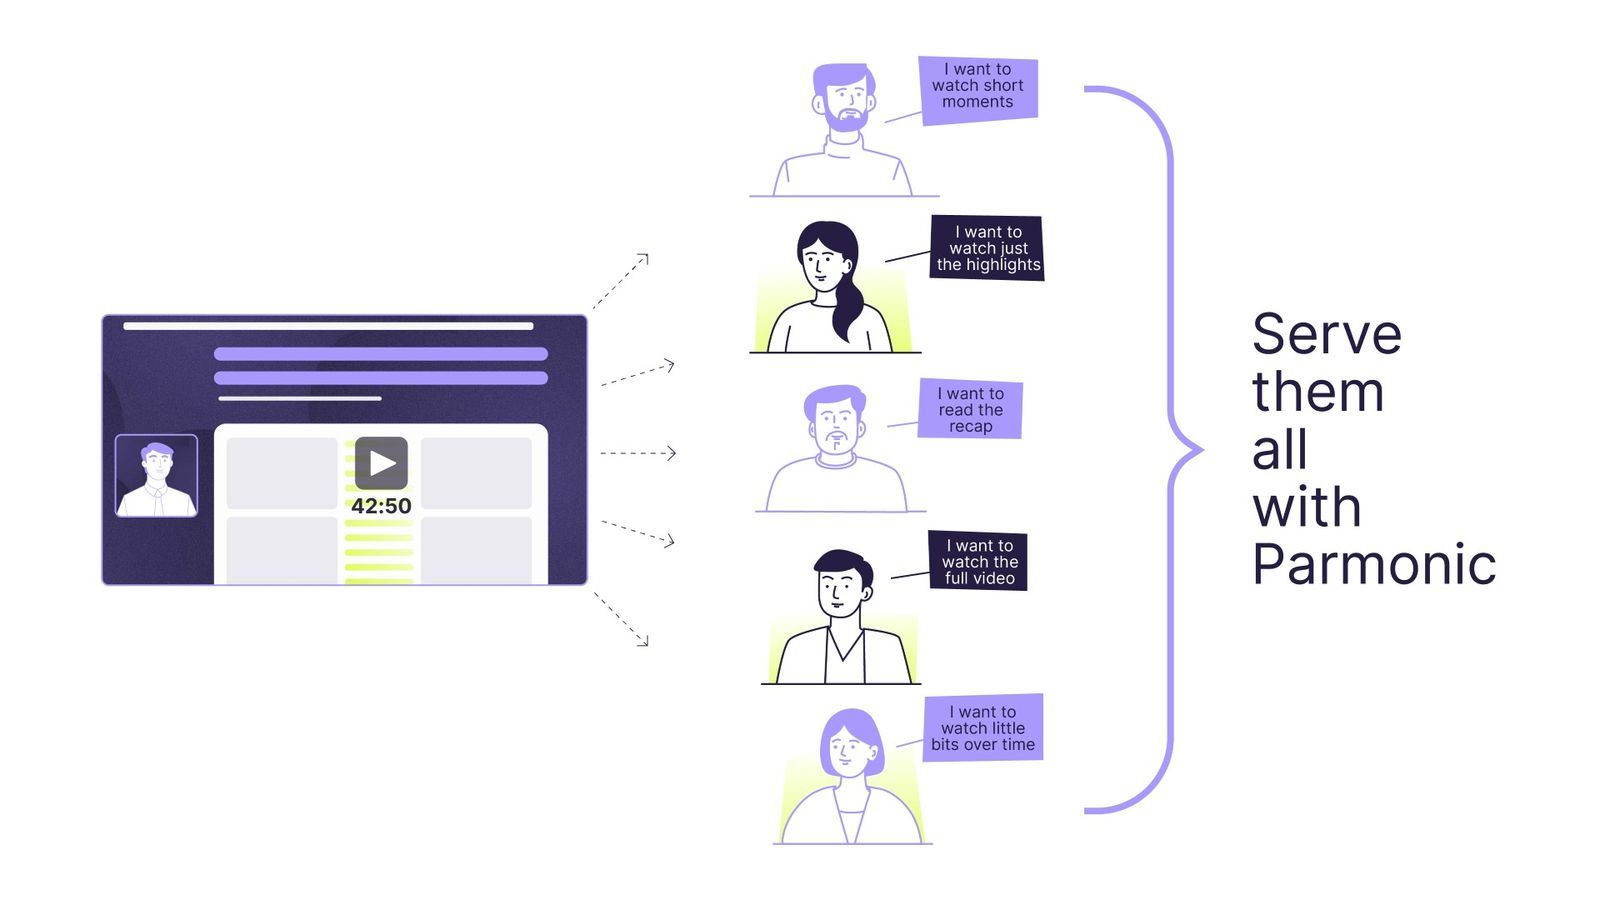 Parmonic's AI helps B2B marketers turn webinars & long videos into shorter, multi-format content to reach more people.